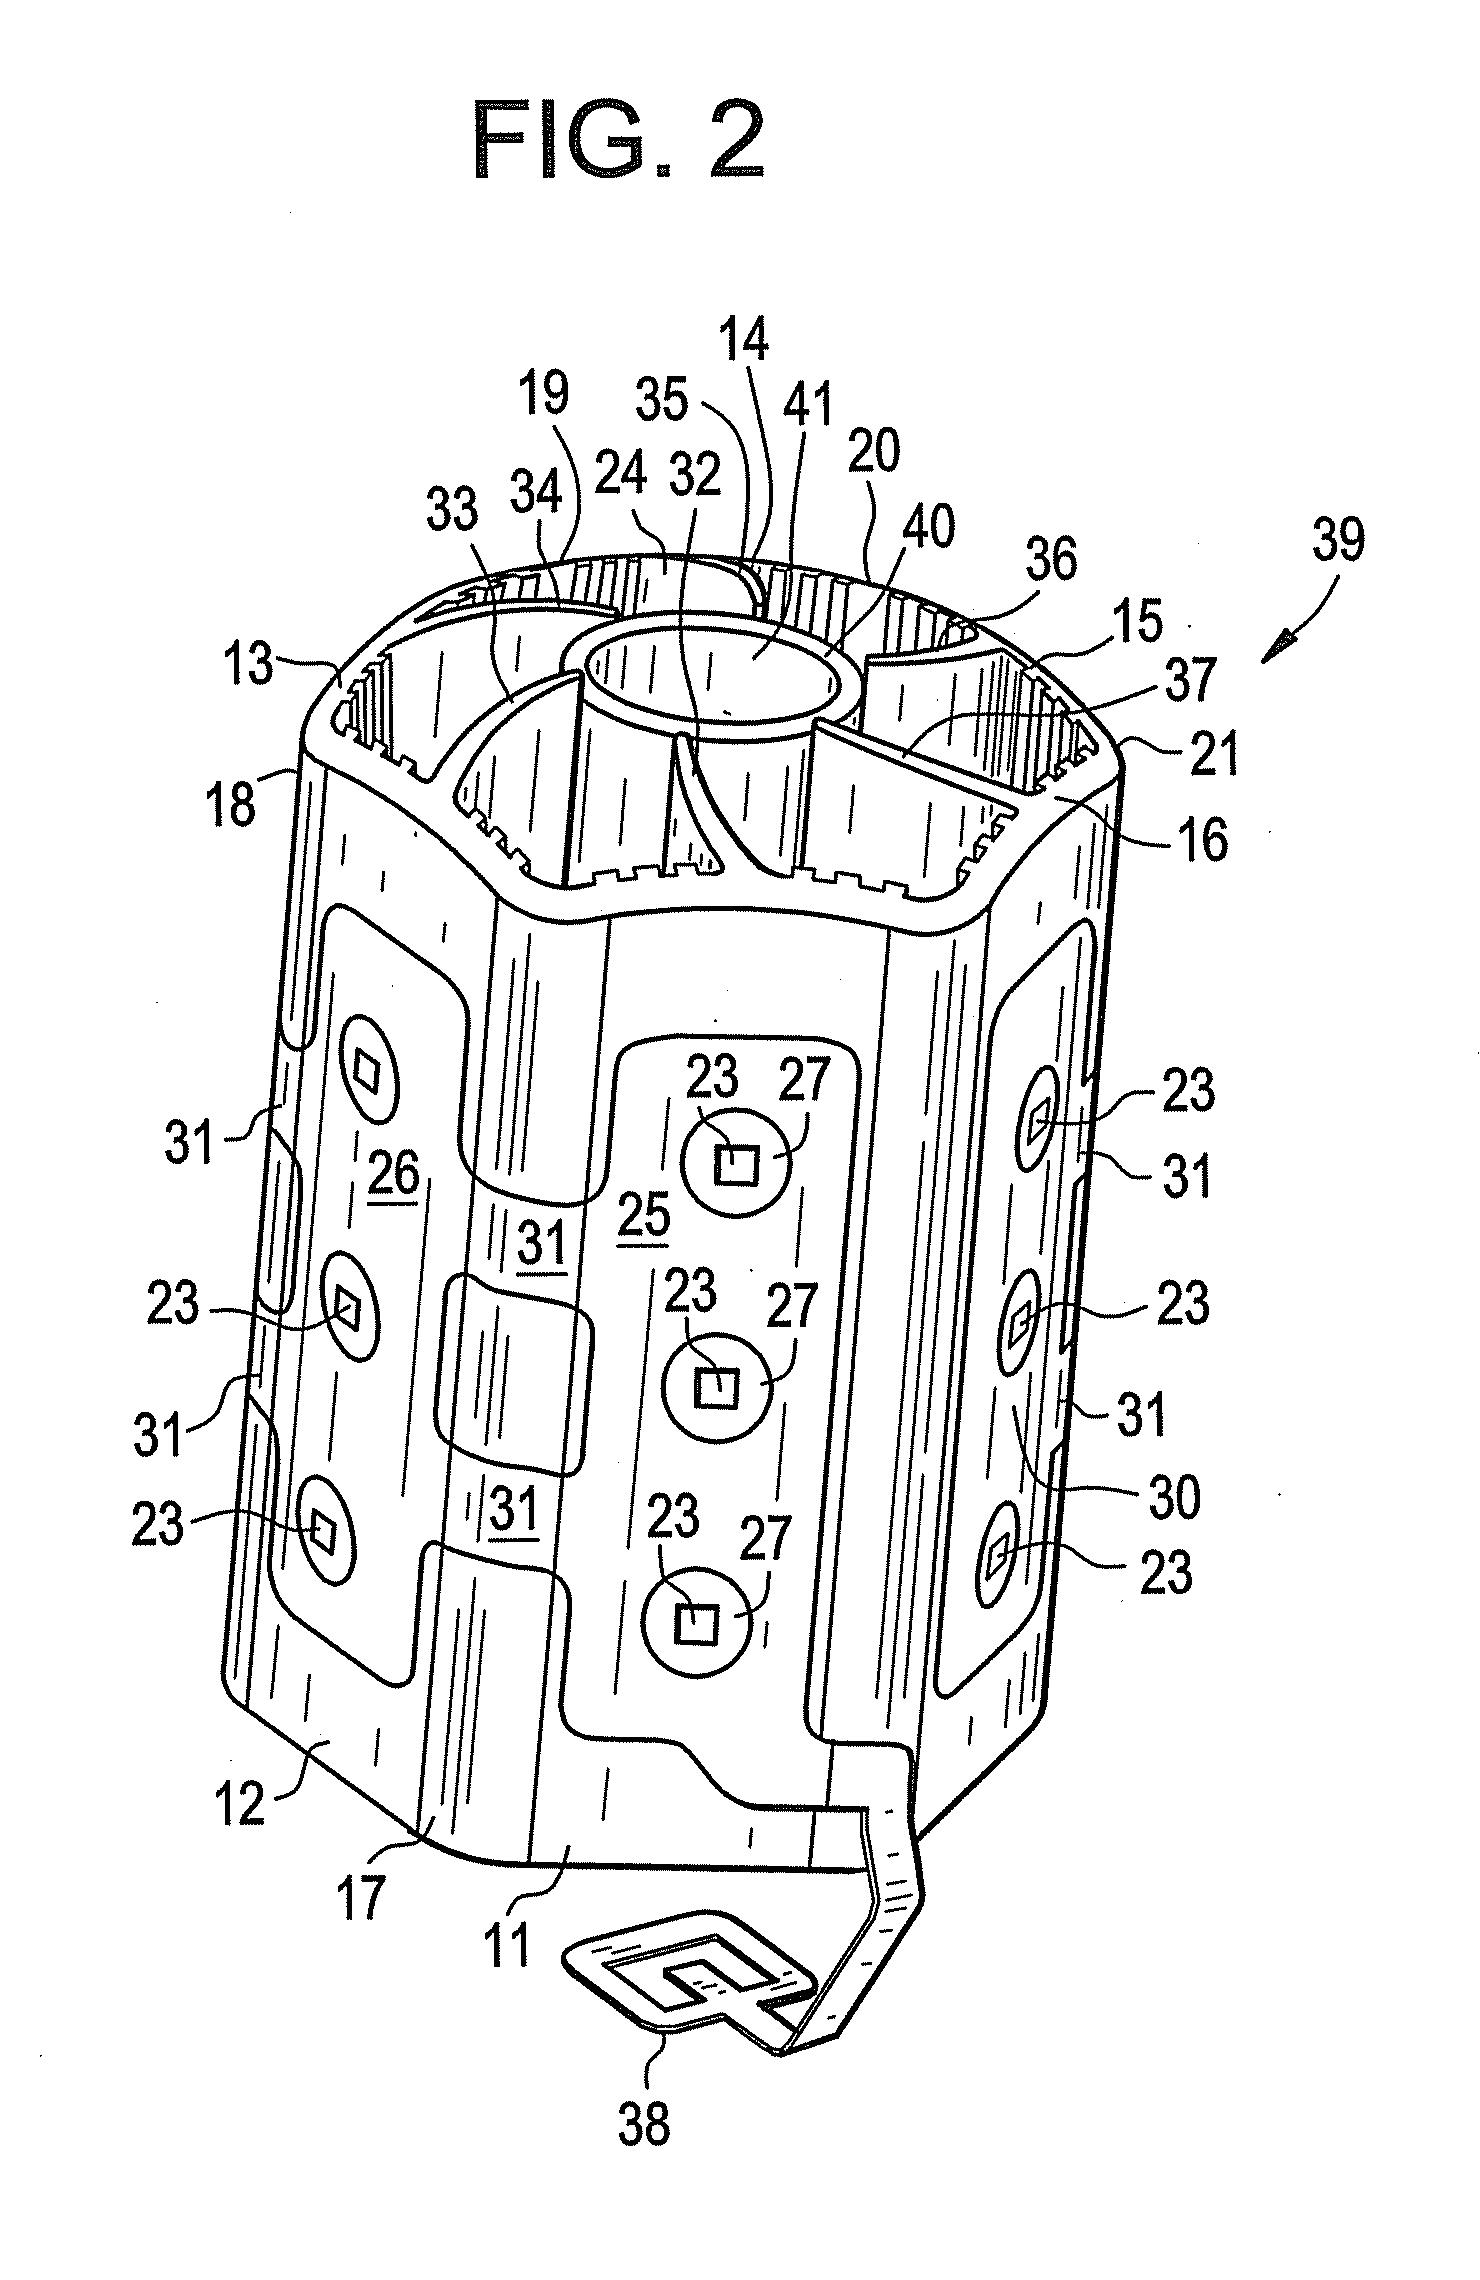 Heat sink structures, lighting elements and lamps incorporating same, and methods of making same